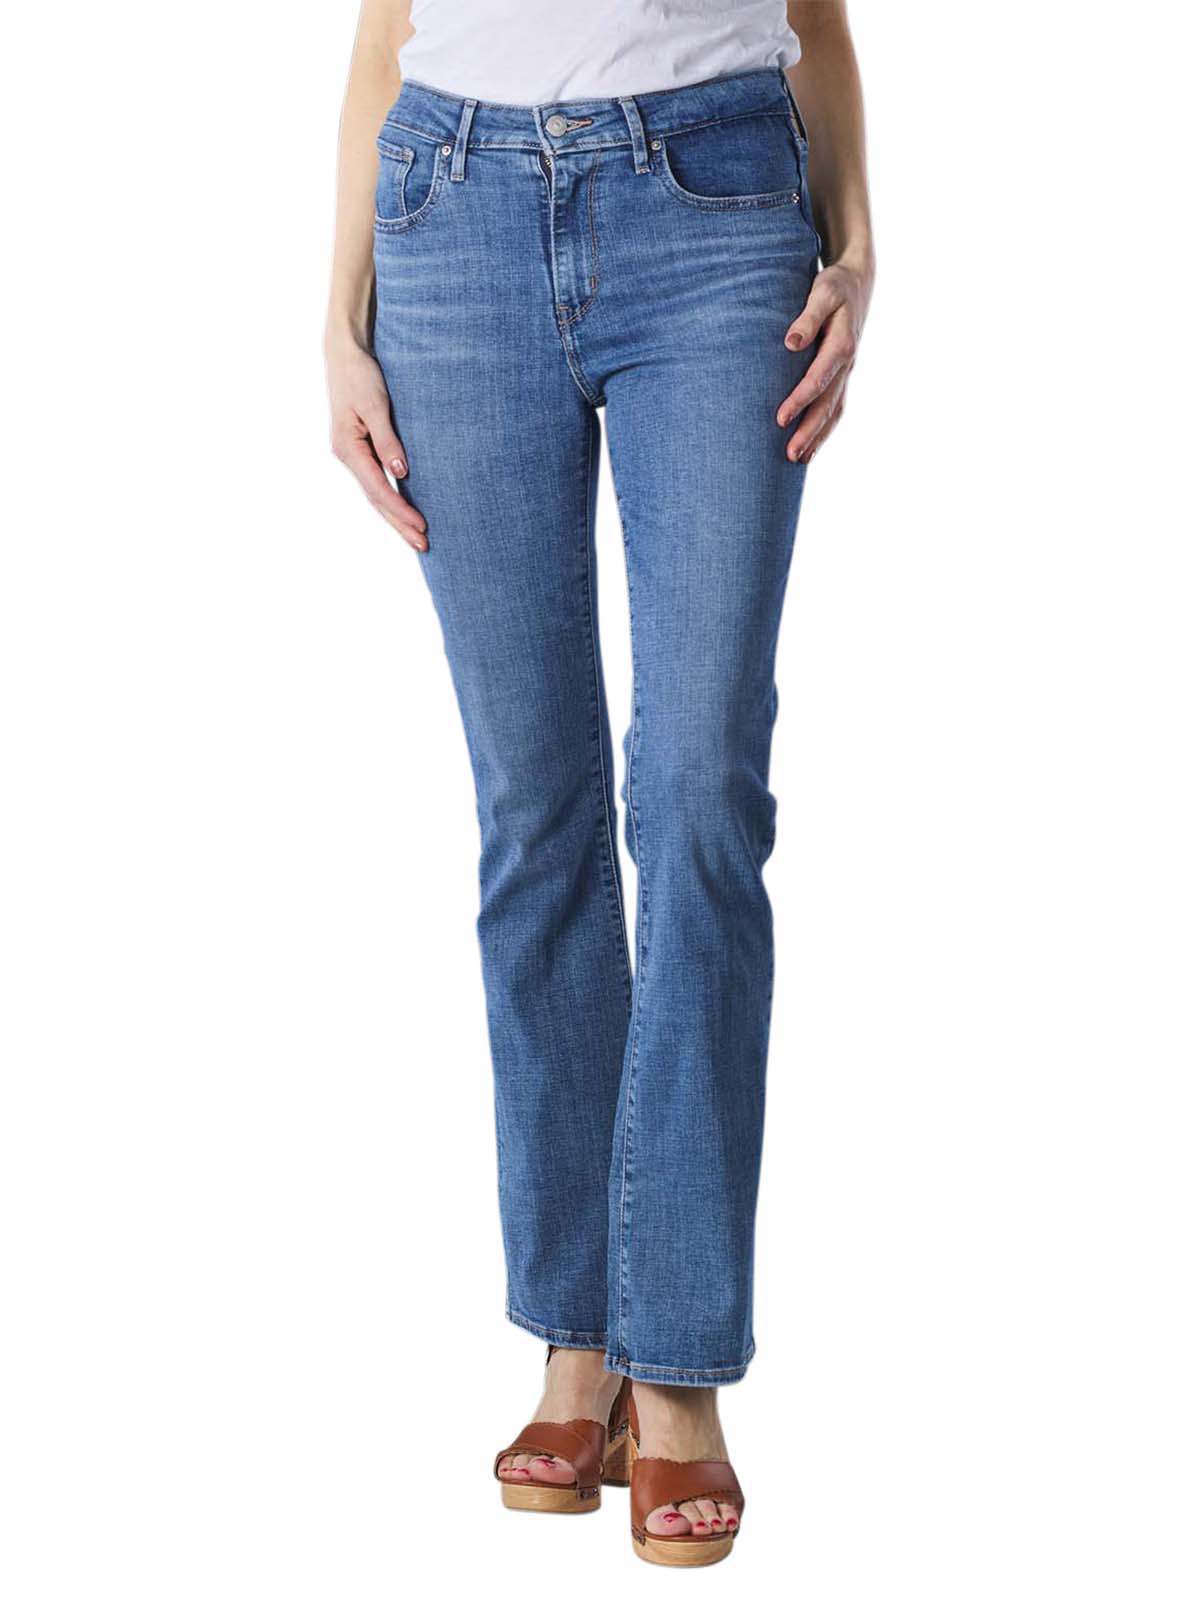 Levi's 725 Jeans Bootcut Fit lapis speed Levi's Women's Jeans | Free  Shipping on  - SIMPLY LOOK GOOD